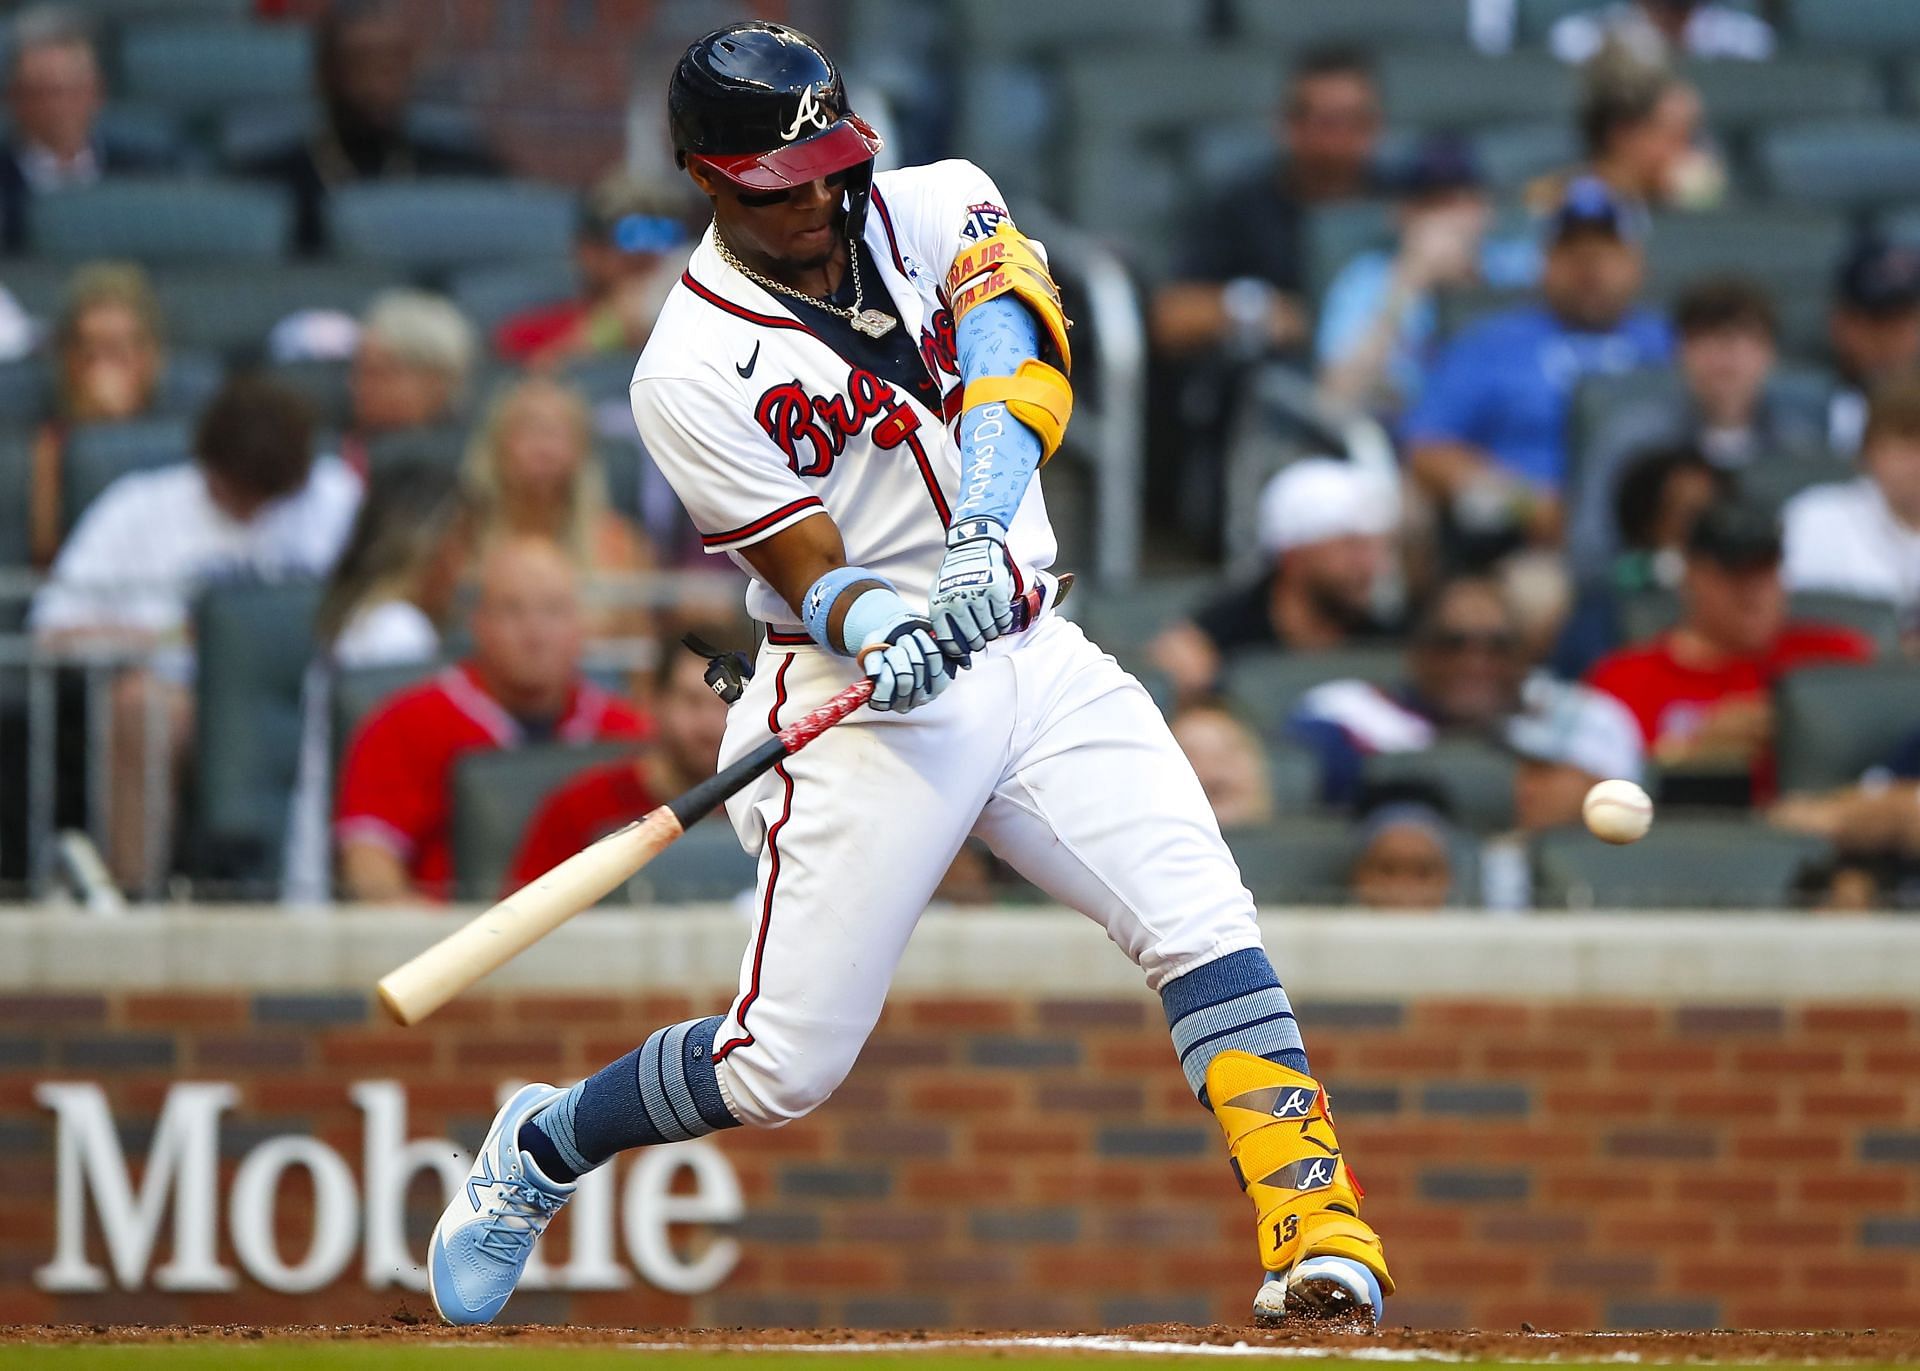 Ronald Acuna Jr. looks to return to form